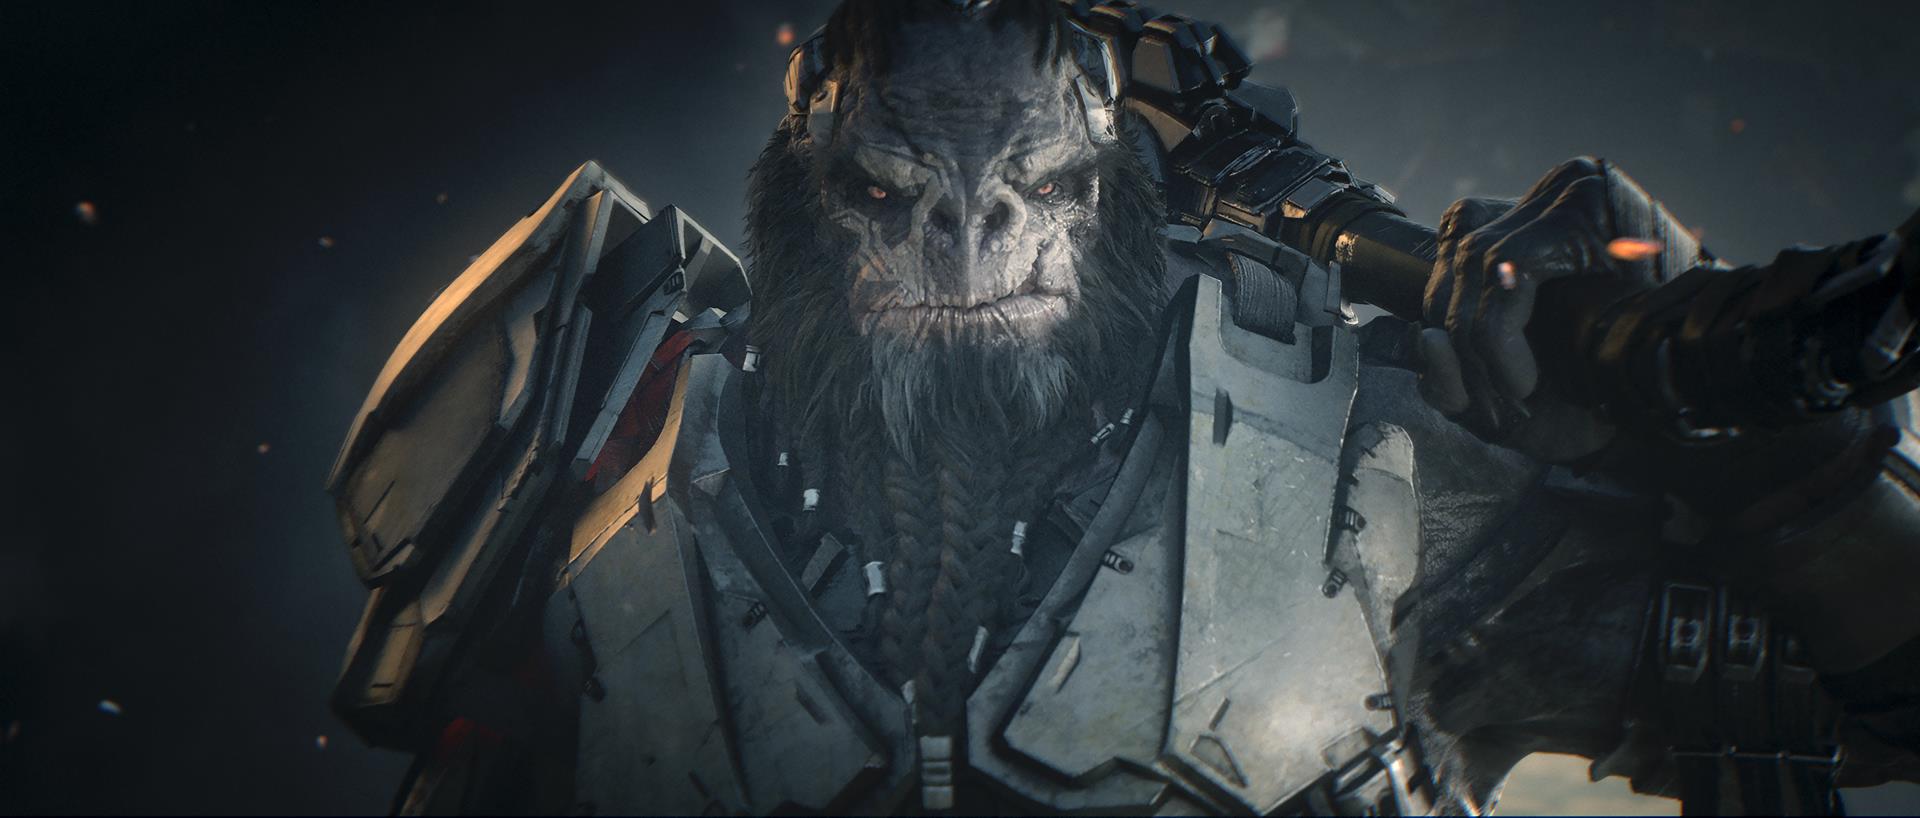 Image for Halo Wars 2: another confusing attempt at a console RTS